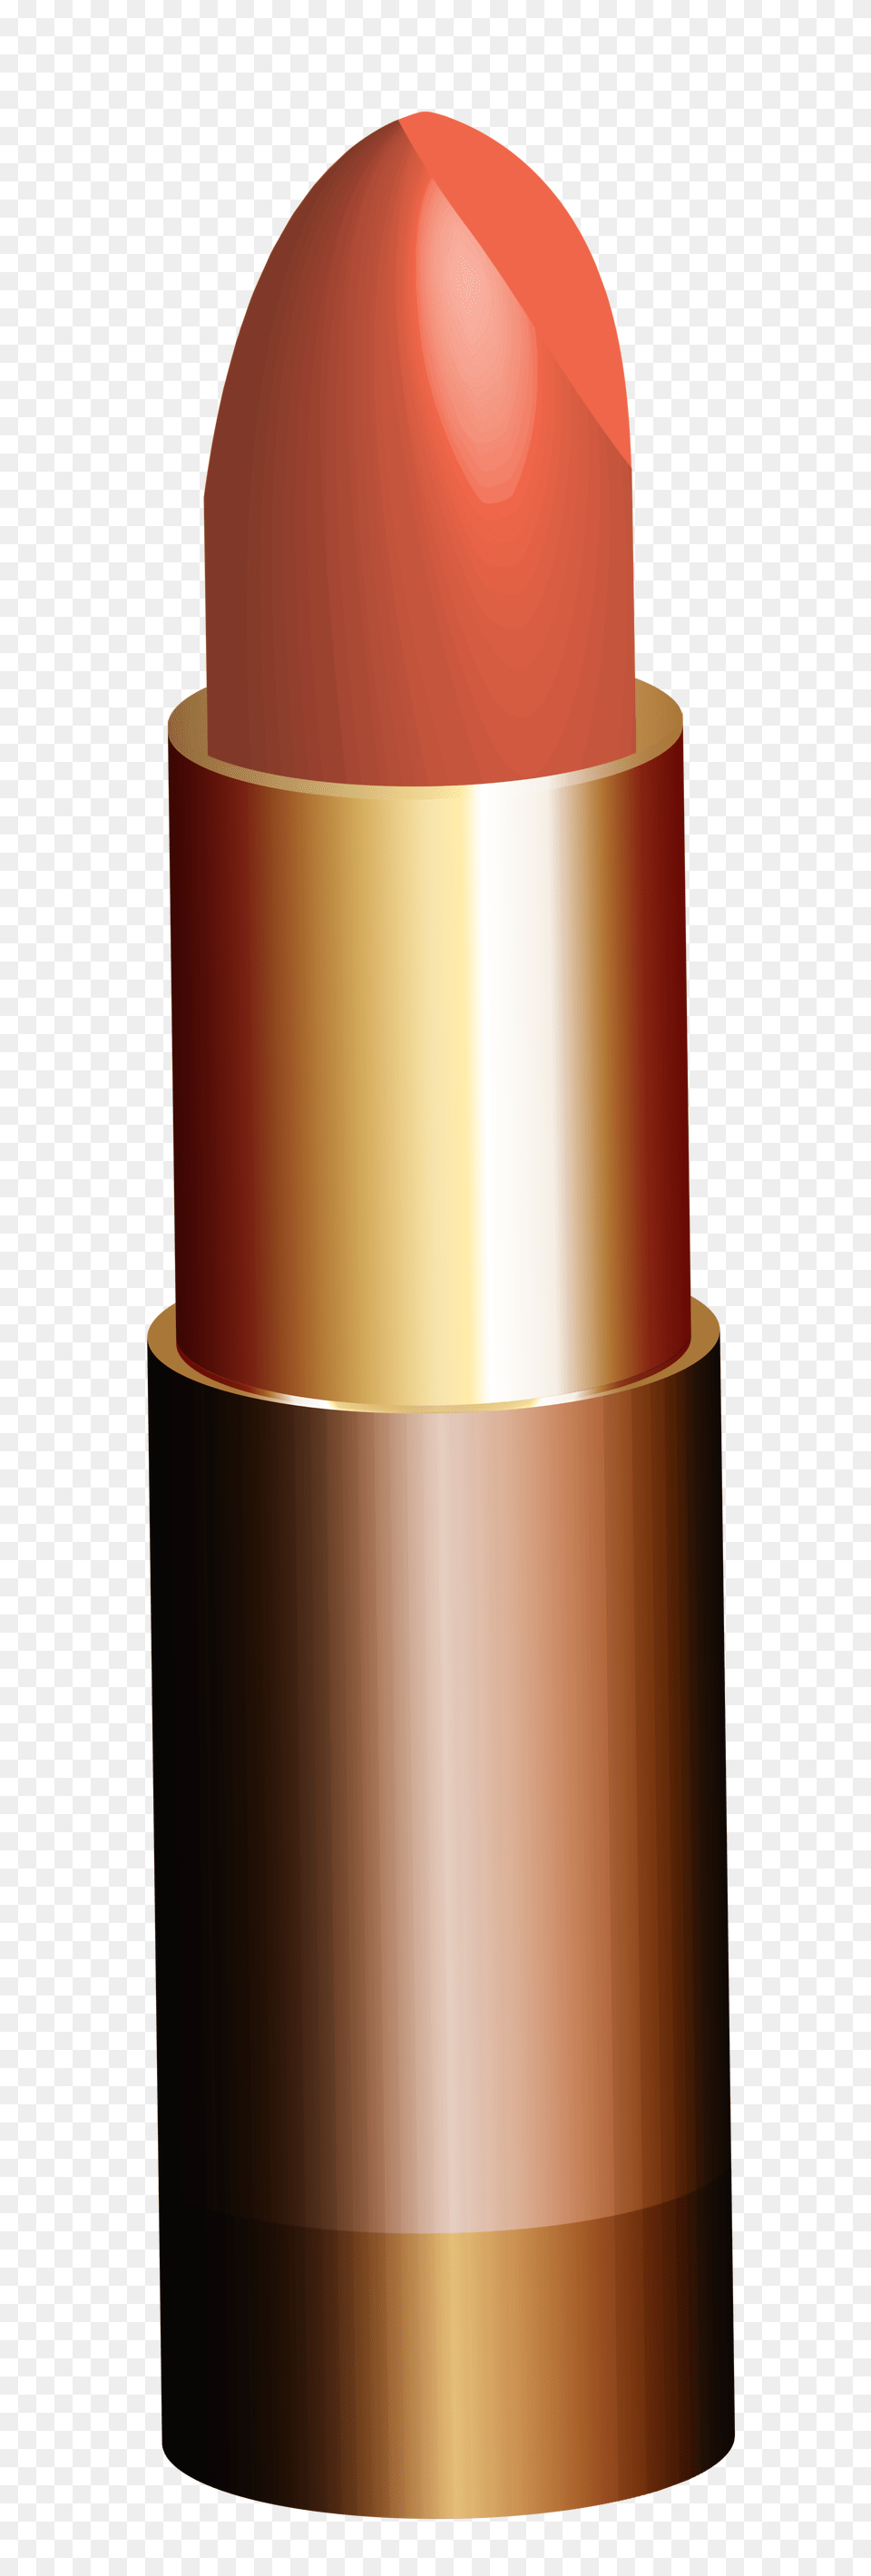 Lipstick, Cosmetics, Ammunition, Bullet, Weapon Free Png Download